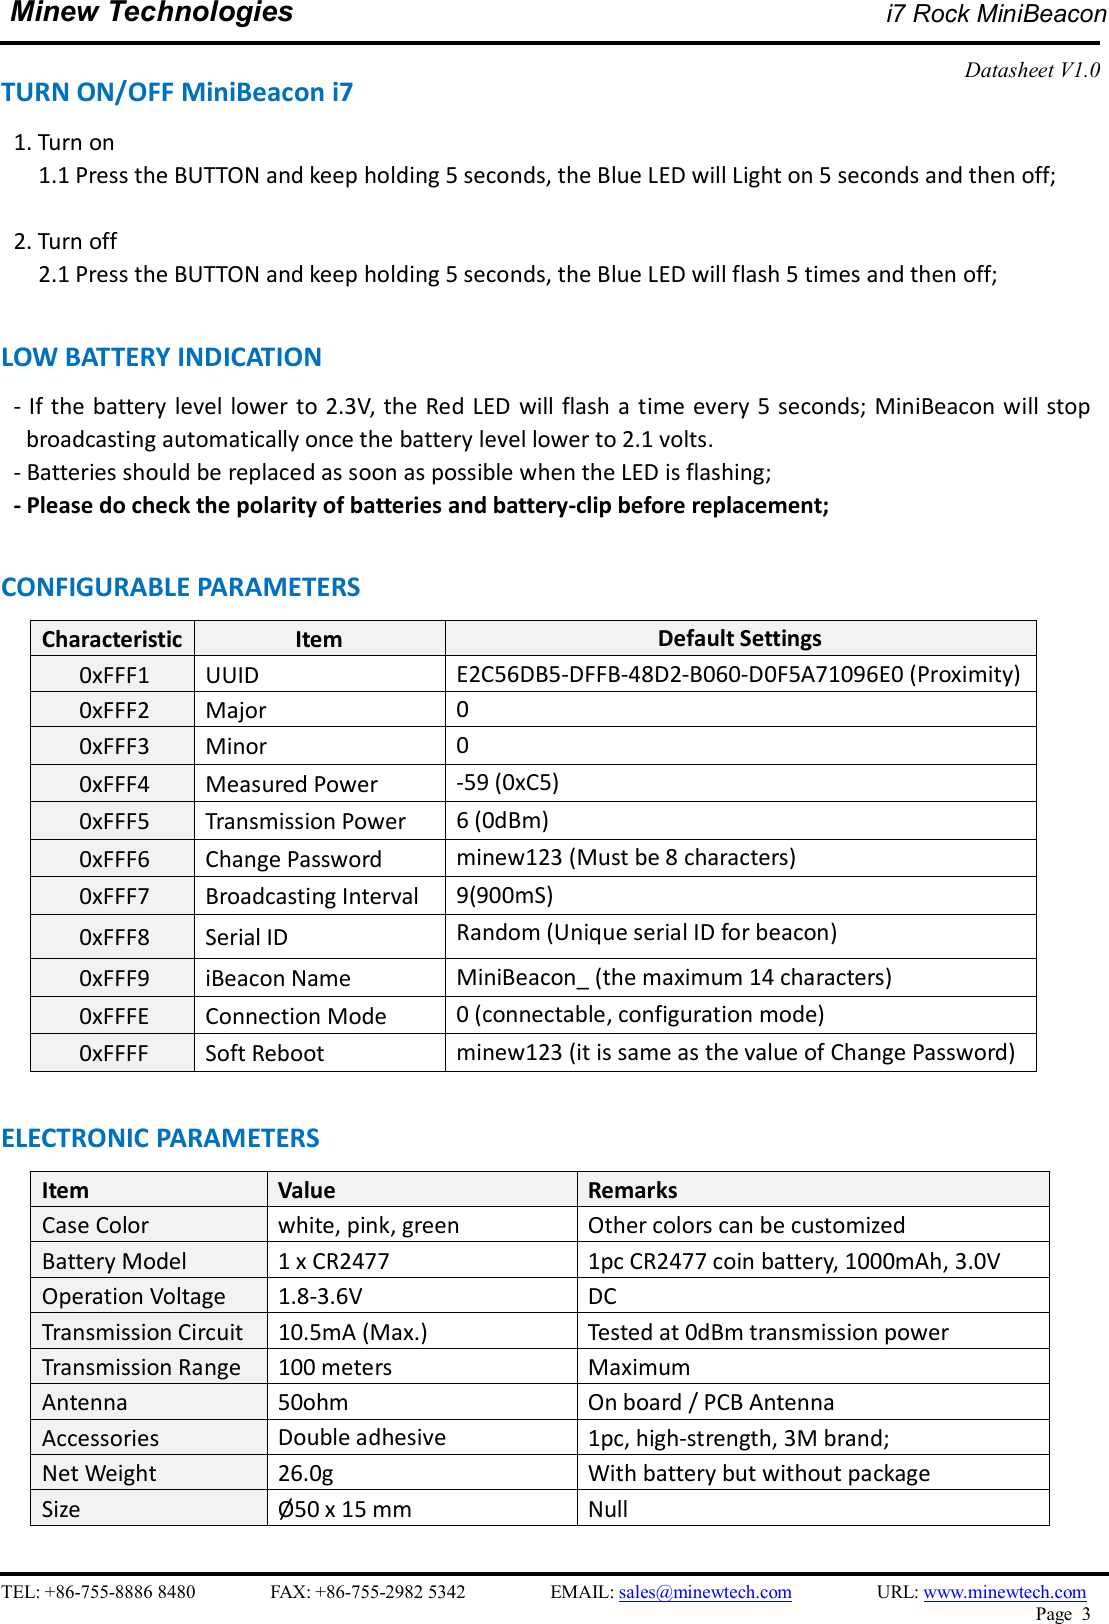    TEL: +86-755-8886 8480                FAX: +86-755-2982 5342                  EMAIL: sales@minewtech.com                  URL: www.minewtech.com Page  3  Minew Technologies i7 Rock MiniBeacon  Datasheet V1.0   TURN ON/OFF MiniBeacon i7 1. Turn on         1.1 Press the BUTTON and keep holding 5 seconds, the Blue LED will Light on 5 seconds and then off;    2. Turn off         2.1 Press the BUTTON and keep holding 5 seconds, the Blue LED will flash 5 times and then off;    LOW BATTERY INDICATION                                                                            - If the battery level lower to 2.3V, the Red LED  will flash a time every 5 seconds; MiniBeacon will stop broadcasting automatically once the battery level lower to 2.1 volts.   - Batteries should be replaced as soon as possible when the LED is flashing; - Please do check the polarity of batteries and battery-clip before replacement;    CONFIGURABLE PARAMETERS                                                 Characteristic Item  Default Settings 0xFFF1  UUID    E2C56DB5-DFFB-48D2-B060-D0F5A71096E0 (Proximity)       0xFFF2  Major  0       0xFFF3  Minor  0       0xFFF4  Measured Power  -59 (0xC5)       0xFFF5  Transmission Power  6 (0dBm)       0xFFF6  Change Password  minew123 (Must be 8 characters)       0xFFF7  Broadcasting Interval  9(900mS)       0xFFF8  Serial ID  Random (Unique serial ID for beacon)       0xFFF9  iBeacon Name  MiniBeacon_ (the maximum 14 characters)       0xFFFE  Connection Mode  0 (connectable, configuration mode)       0xFFFF  Soft Reboot    minew123 (it is same as the value of Change Password)  ELECTRONIC PARAMETERS Item    Value  Remarks Case Color  white, pink, green  Other colors can be customized Battery Model  1 x CR2477  1pc CR2477 coin battery, 1000mAh, 3.0V Operation Voltage  1.8-3.6V  DC Transmission Circuit  10.5mA (Max.)  Tested at 0dBm transmission power Transmission Range  100 meters  Maximum Antenna  50ohm  On board / PCB Antenna Accessories  Double adhesive  1pc, high-strength, 3M brand; Net Weight  26.0g  With battery but without package Size  Ø50 x 15 mm  Null  